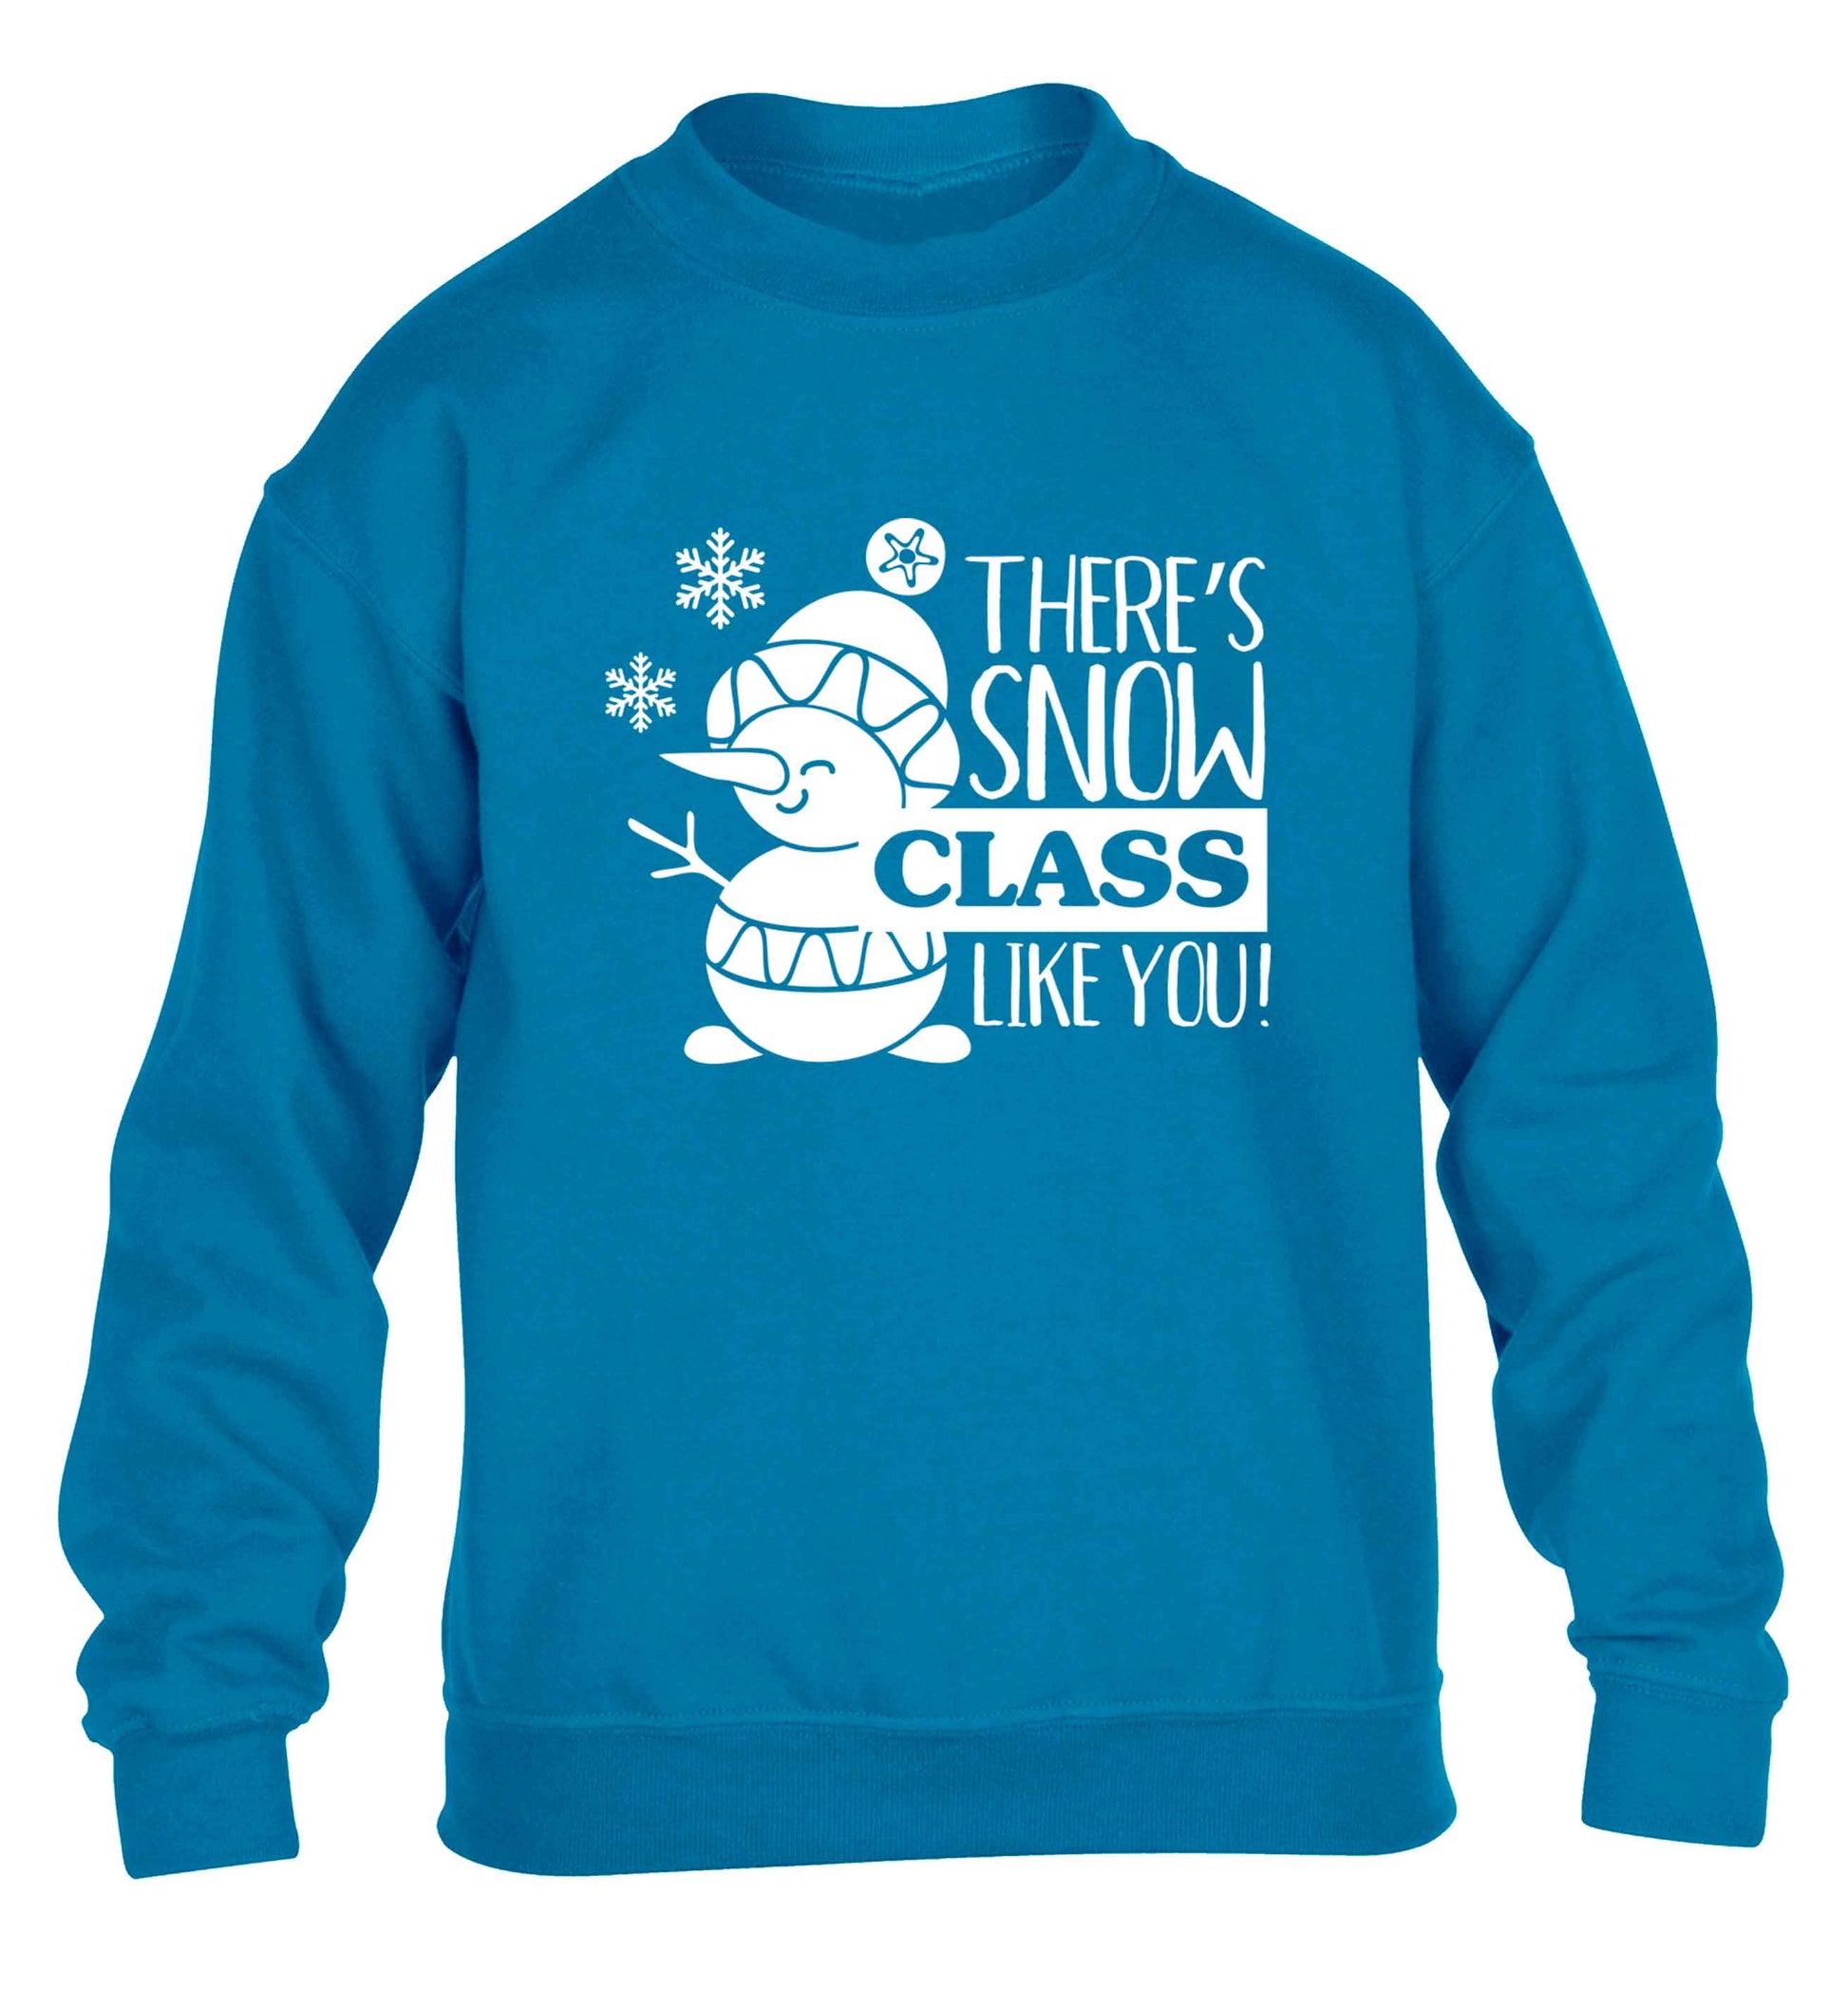 There's snow class like you children's blue sweater 12-13 Years